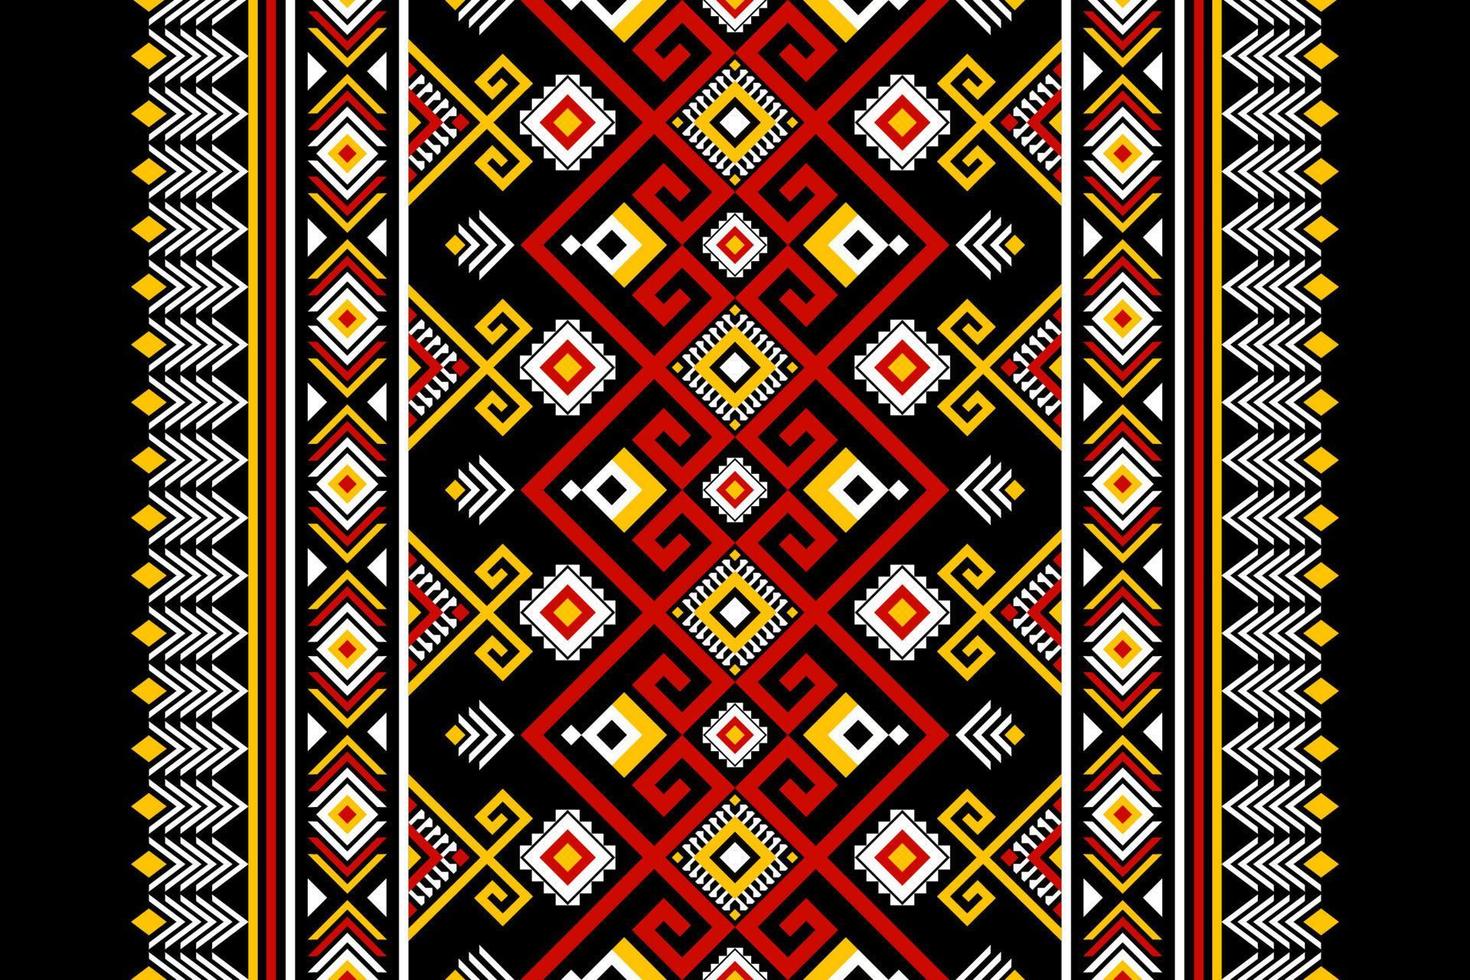 Geometric ethnic pattern traditional. Art tribal aztec style. Design for background,illustration,fabric,batik,clothing,wrapping,wallpaper,carpet,embroidery vector